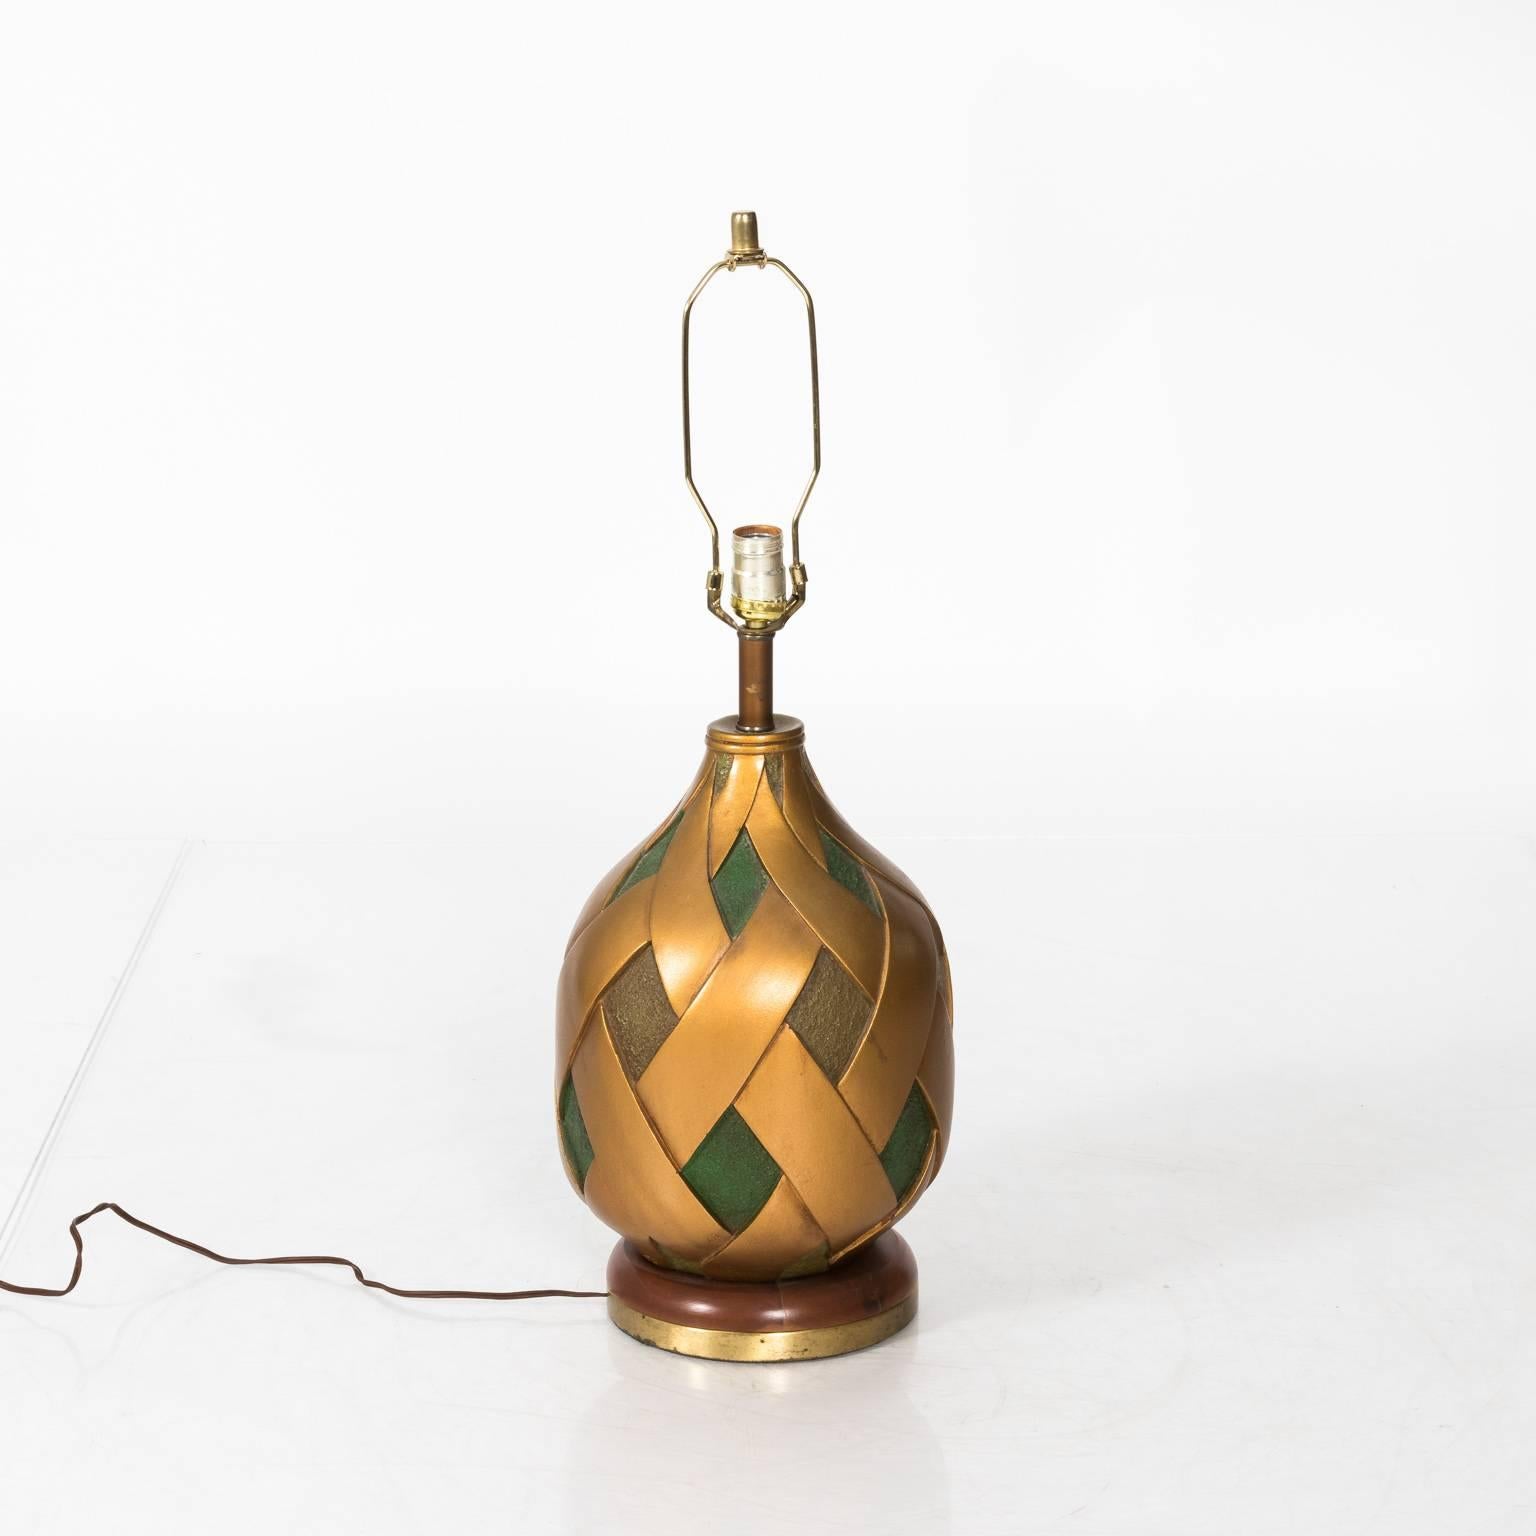 Painted Midcentury Golden and Green Lamps